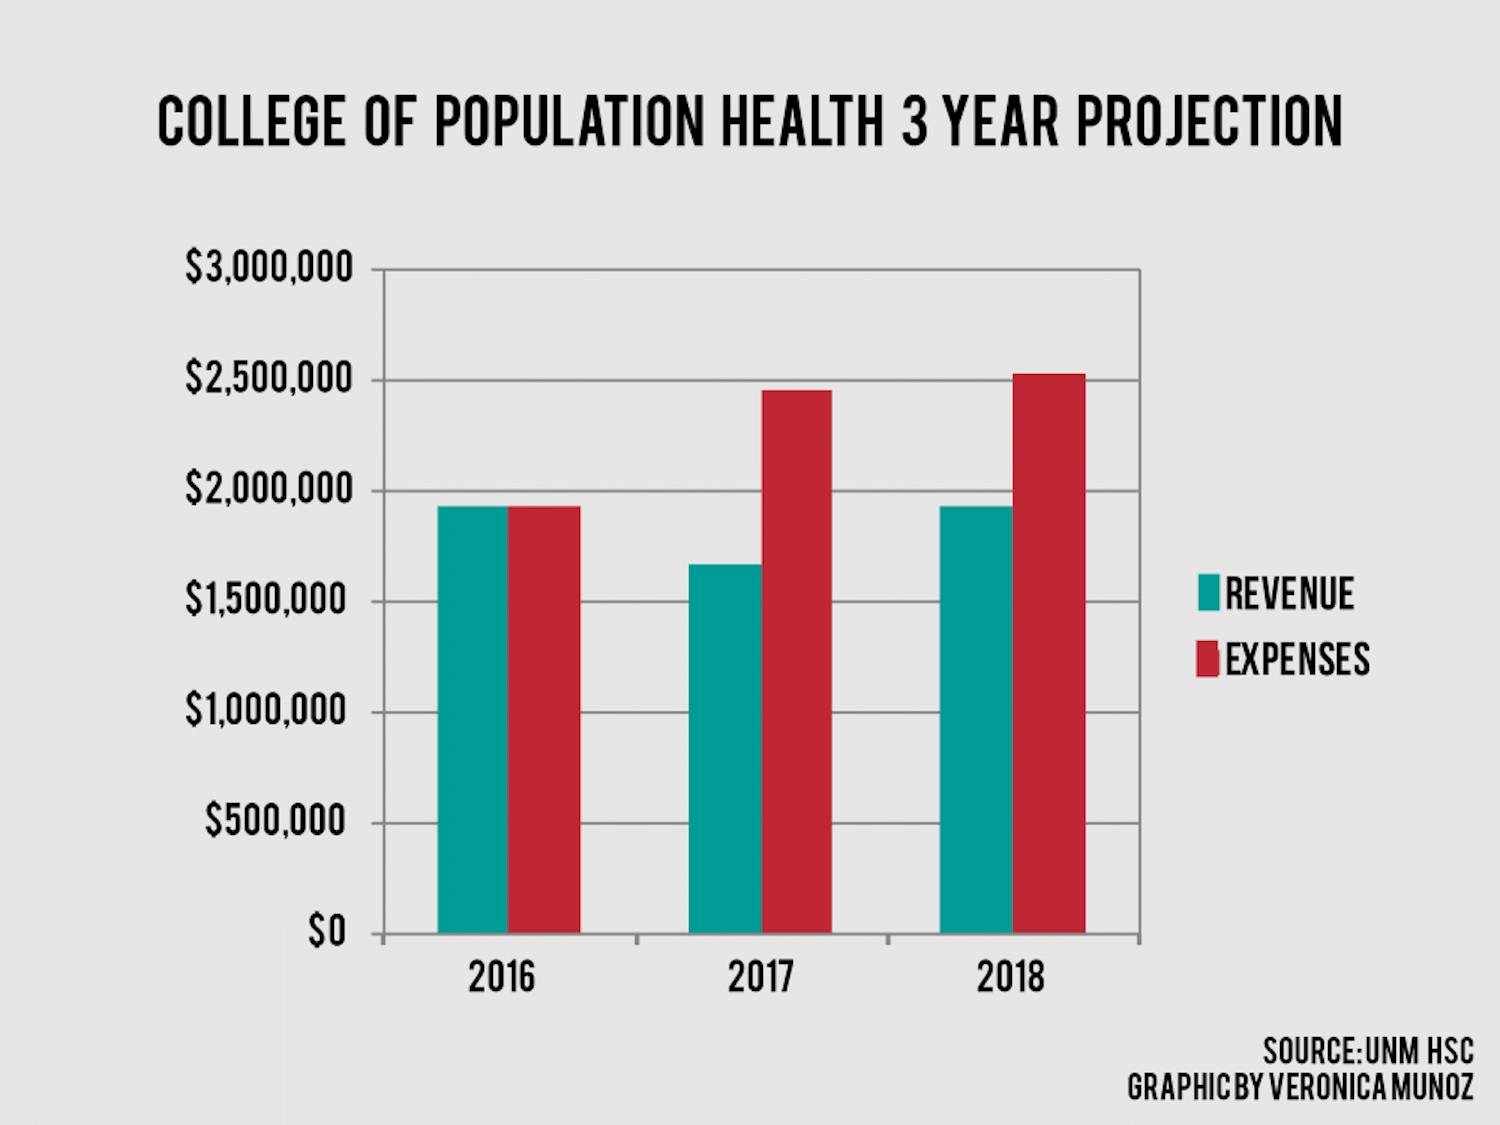 College of Population Health 3 Year Projection